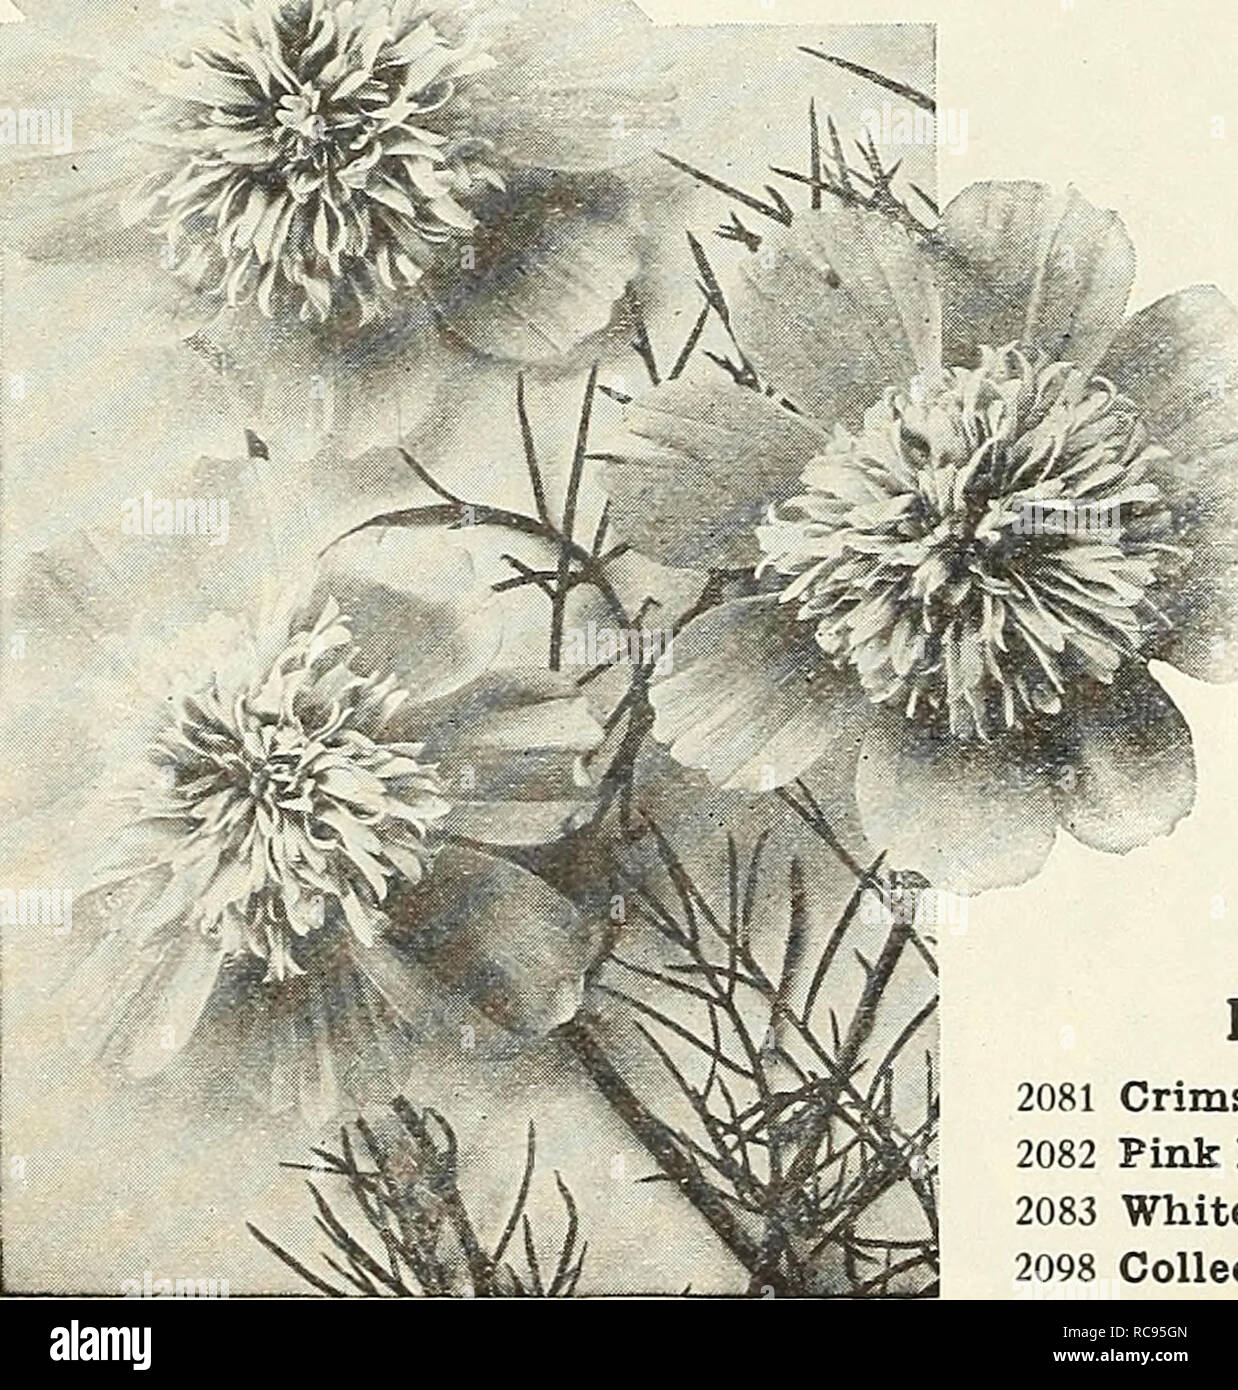 . Dreer's garden book 1928. Seeds Catalogs; Nursery stock Catalogs; Gardening Equipment and supplies Catalogs; Flowers Seeds Catalogs; Vegetables Seeds Catalogs; Fruit Seeds Catalogs. Coreopsis Lanceolata Grandiflora Fl. Pl.. Early Double-flowertng Cosmos Cynoglossum Amabile (Chinese Forget-me-not) 2148 An annual recently introduced from China; of the easiest culture, forming strong plants about 18 inches high and producing through the summer months sprays of intense blue Forget-me-not-like flowers. A splendid addition to the comparatively short list of real blue flowers. Offered last year for Stock Photo